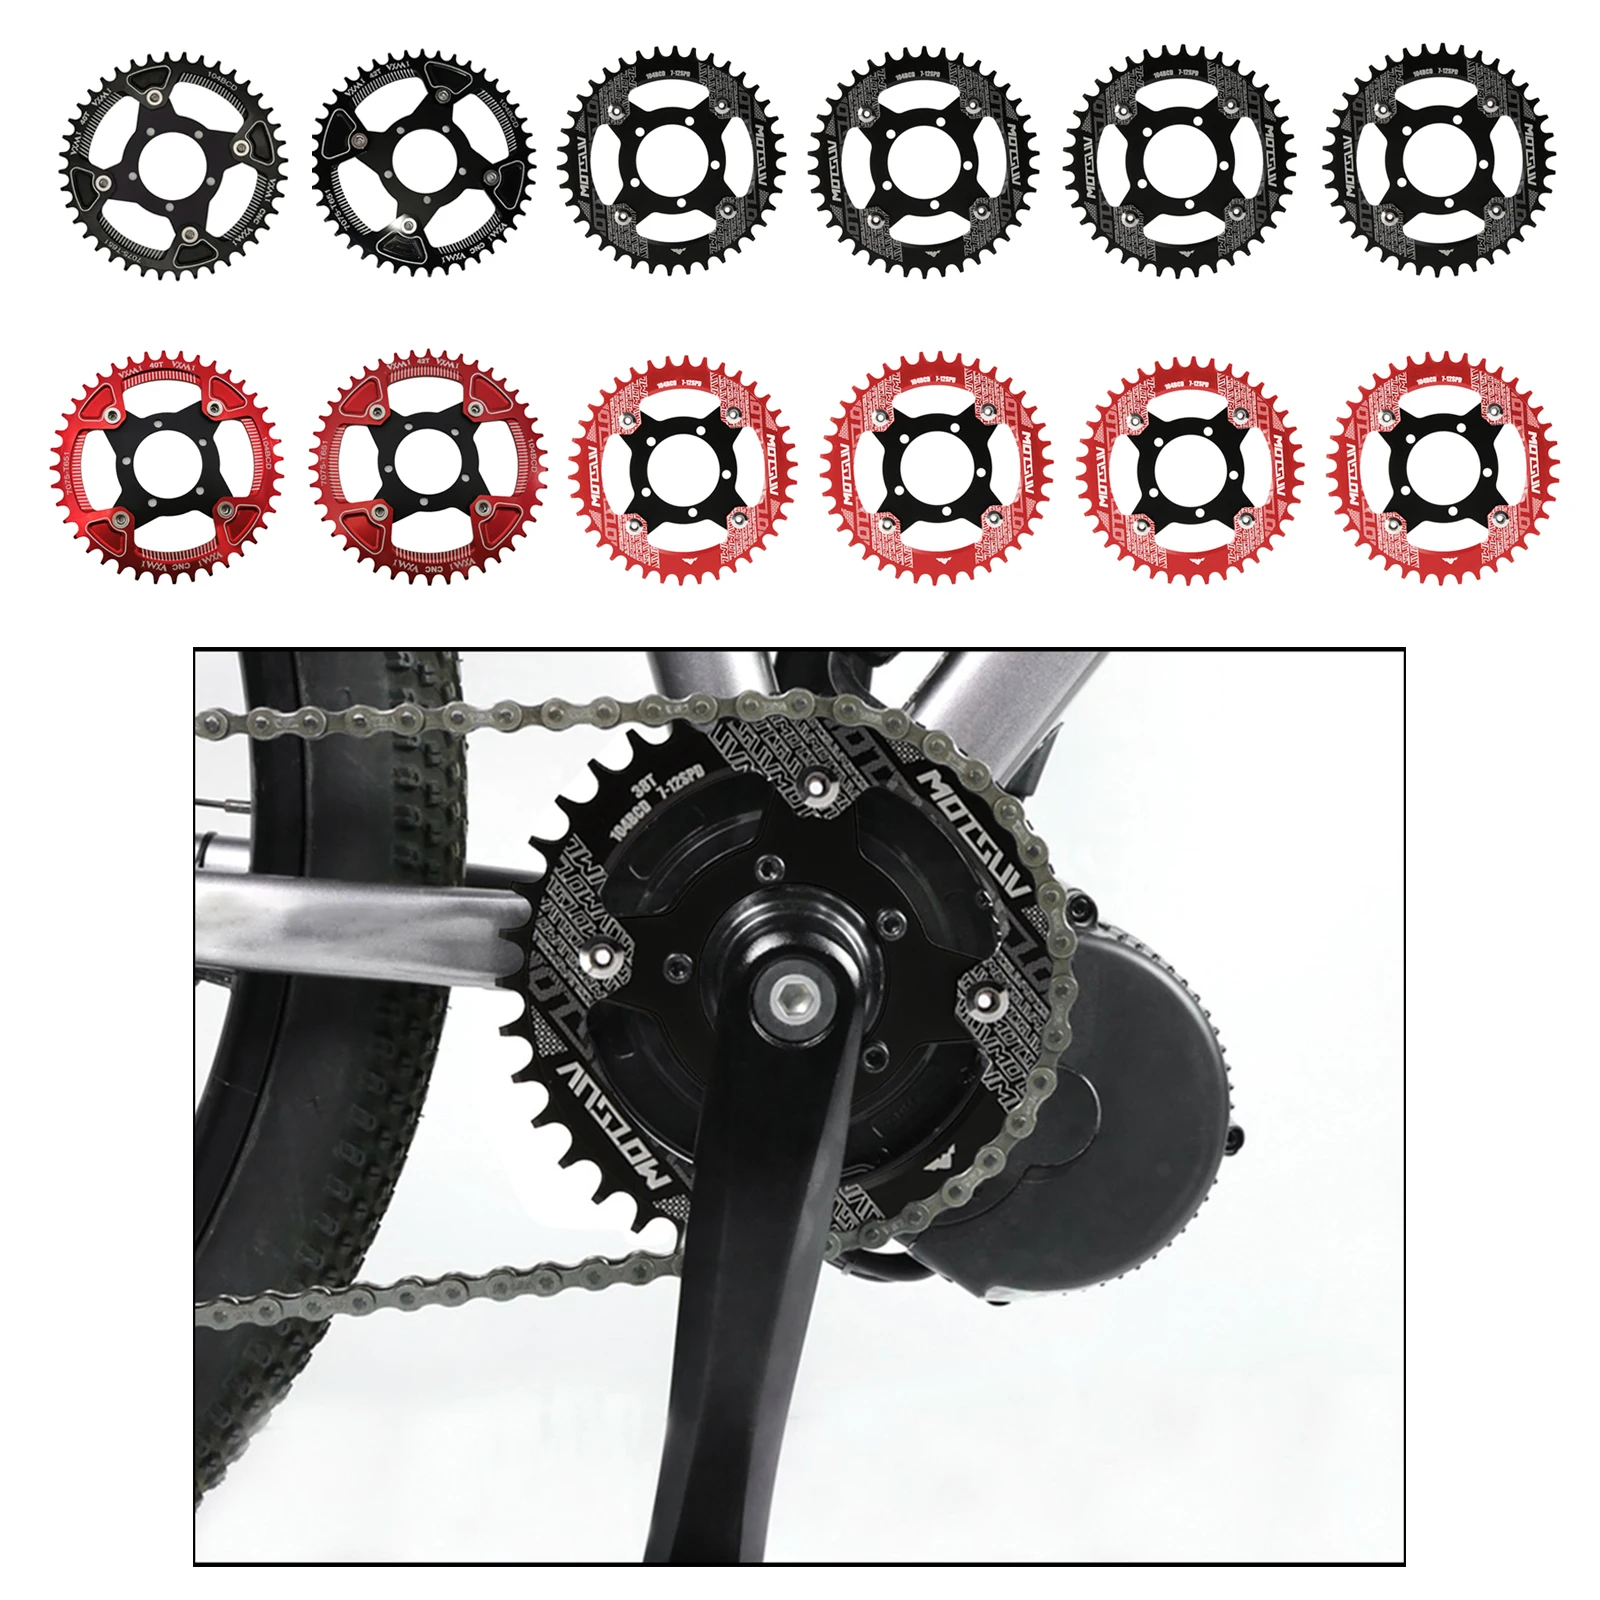 E-bike 104BCD 32/34/36/38/40/42T Chainring Adapter For Bafang Mid Drive Motor Electric Bike Aluminium Alloy Chainrings